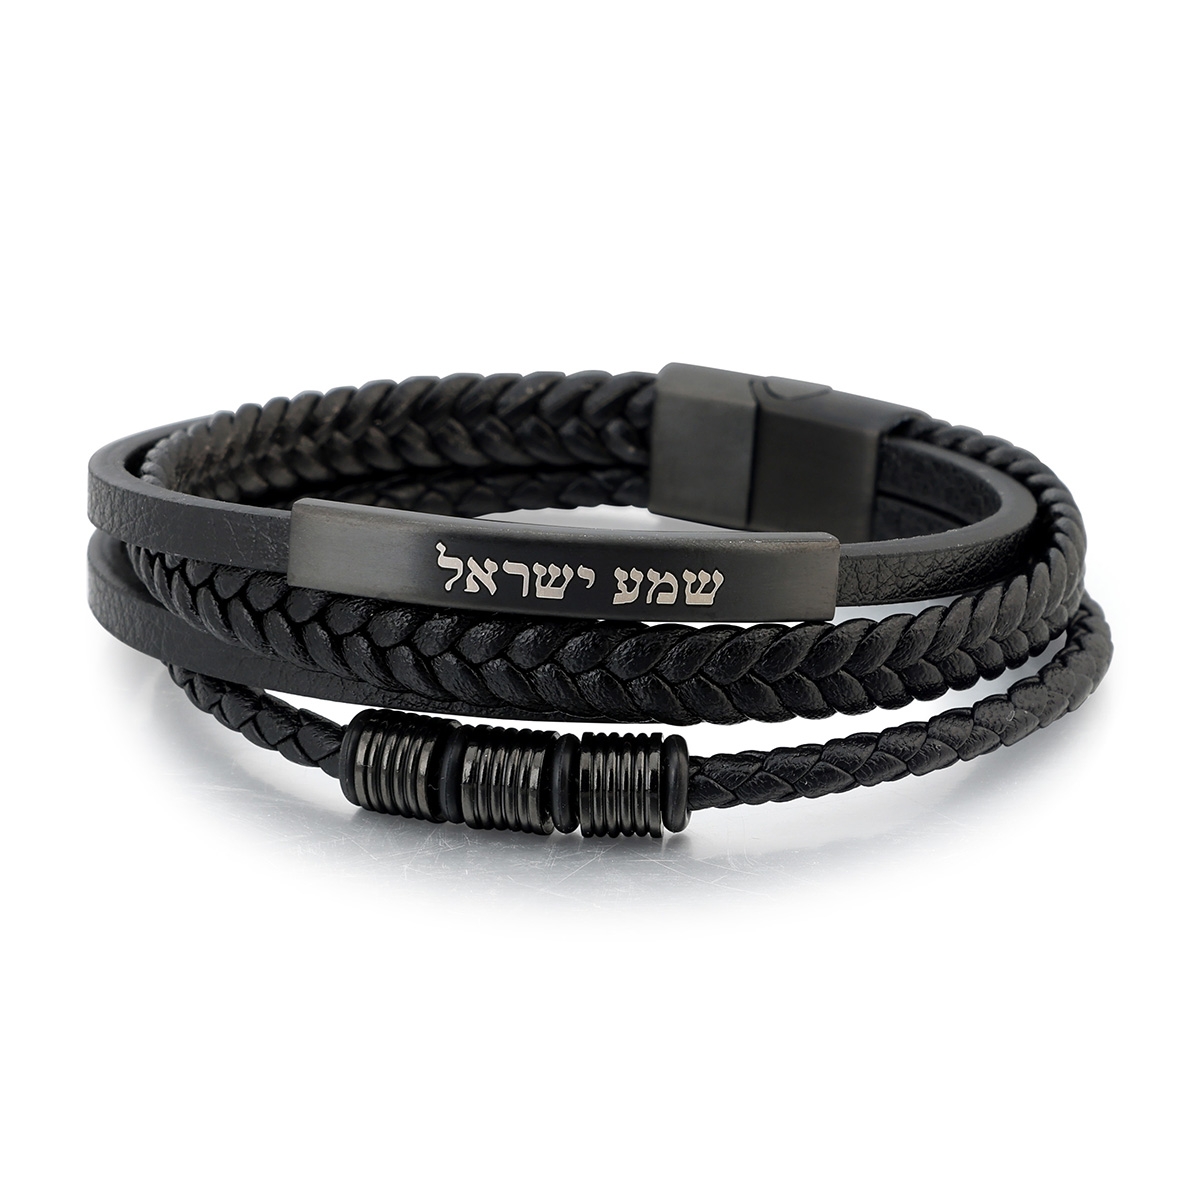 Men's Shema Yisrael Beaded Leather Bracelet with Magnetic Clasp - Black - 1